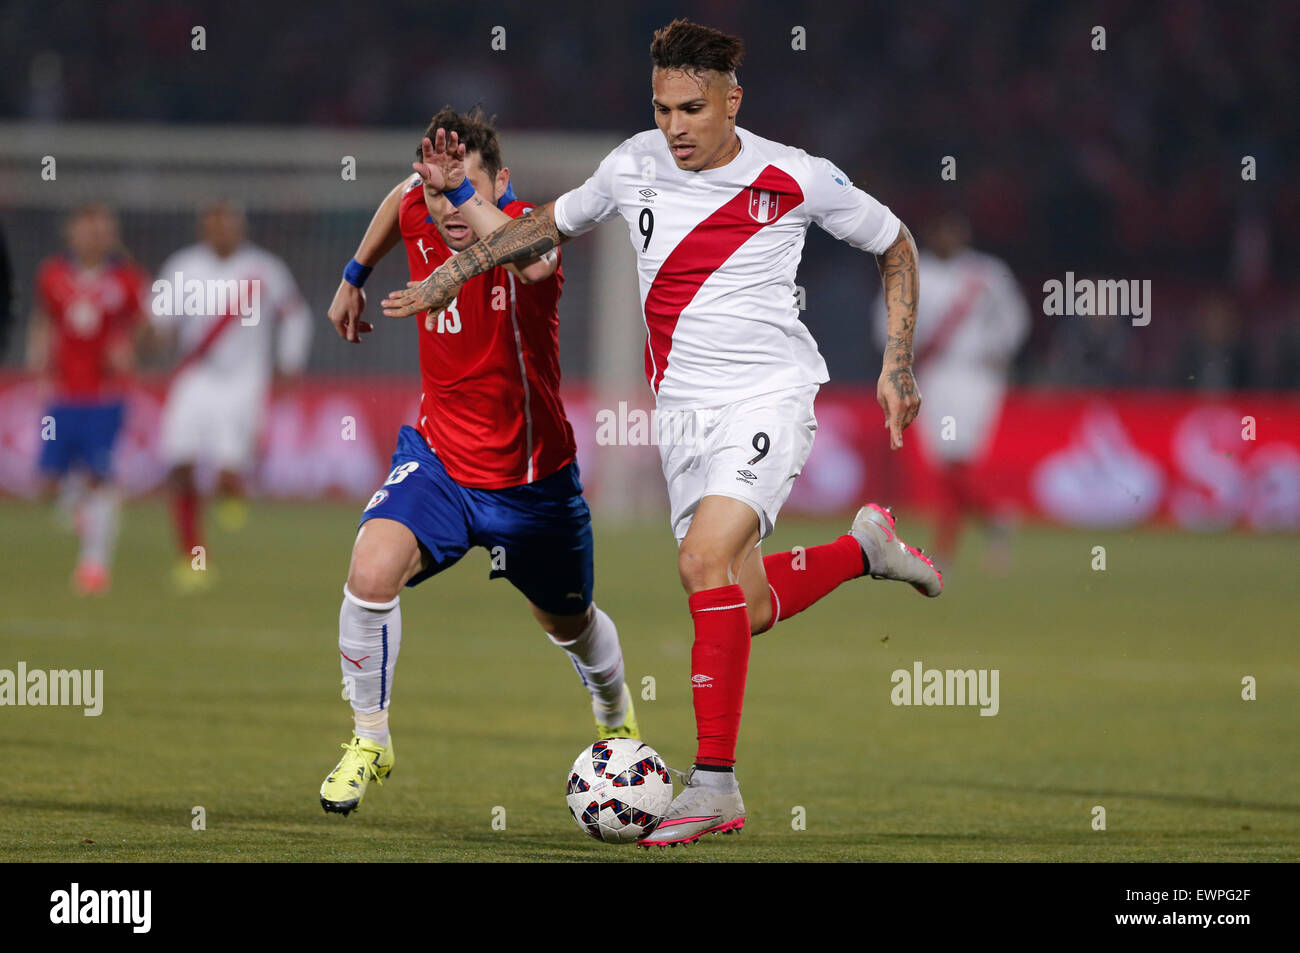 Santiago, Chile. 29th June, 2015. Jose Rojas (L) from Chile vies for the ball with Paolo Guerrero (R) from Peru during the Copa America Chile 2015 semifinal match, held at National Stadium, in Santiago, Chile, on June 29, 2015. Chile won 2-1 Credit:  Guillermo Arias/Xinhua/Alamy Live News Stock Photo